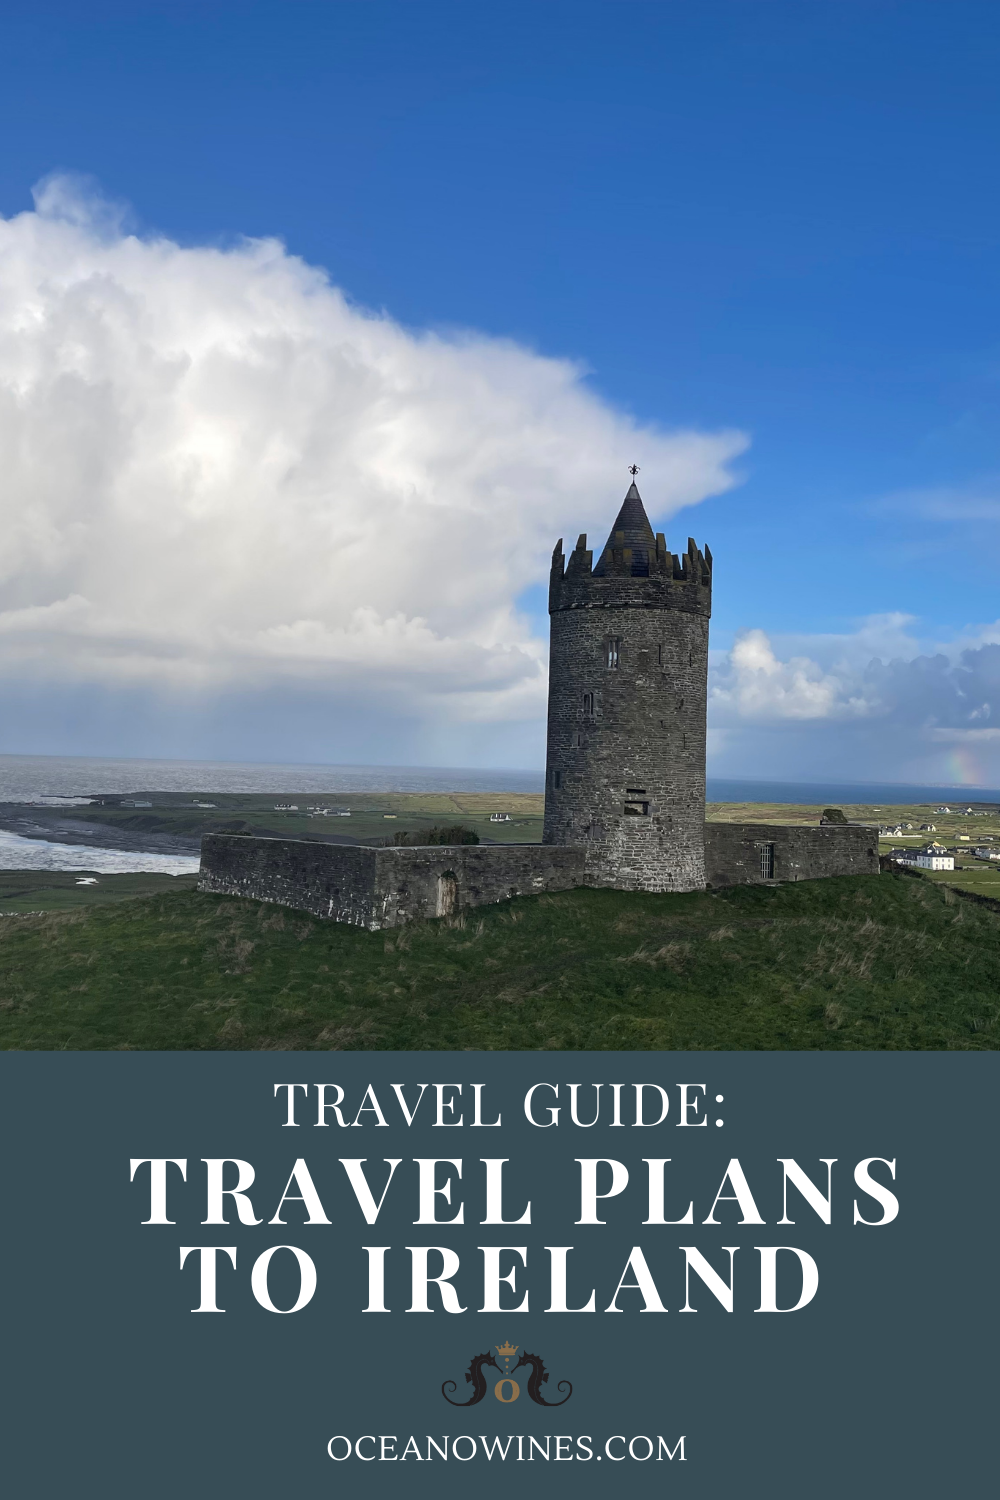 Blog post graphic for "Travel Guide: Travel Plans to Ireland" with image of old castle